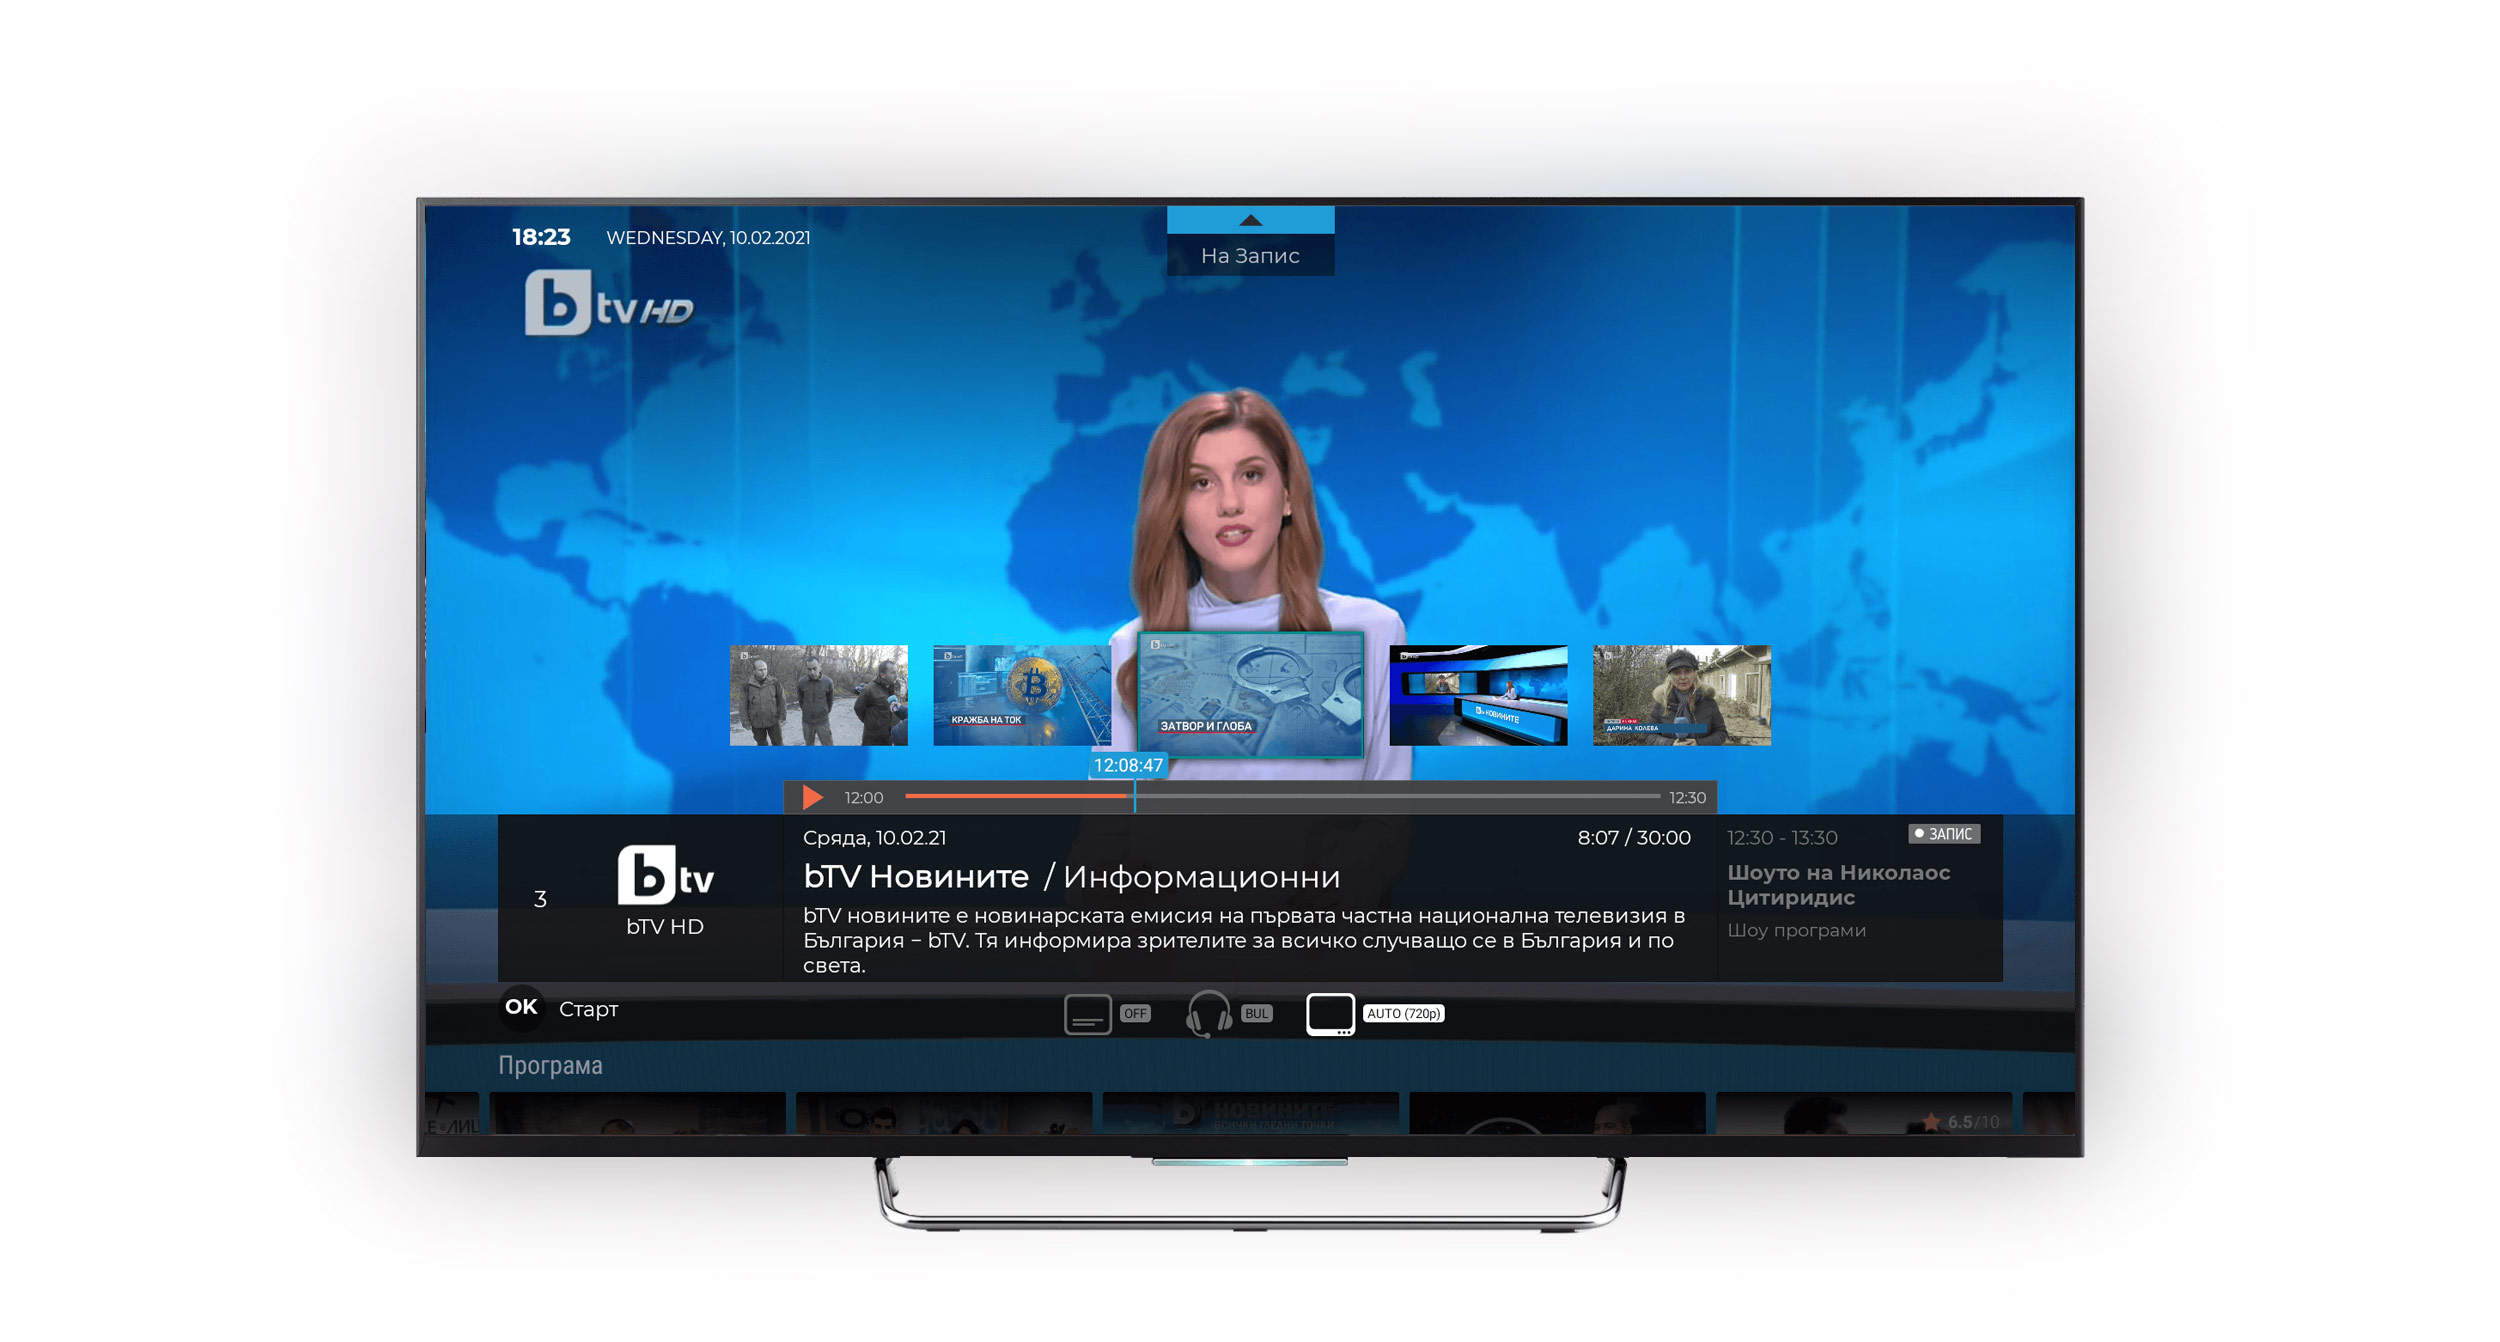 btv, news, native app for Android TV